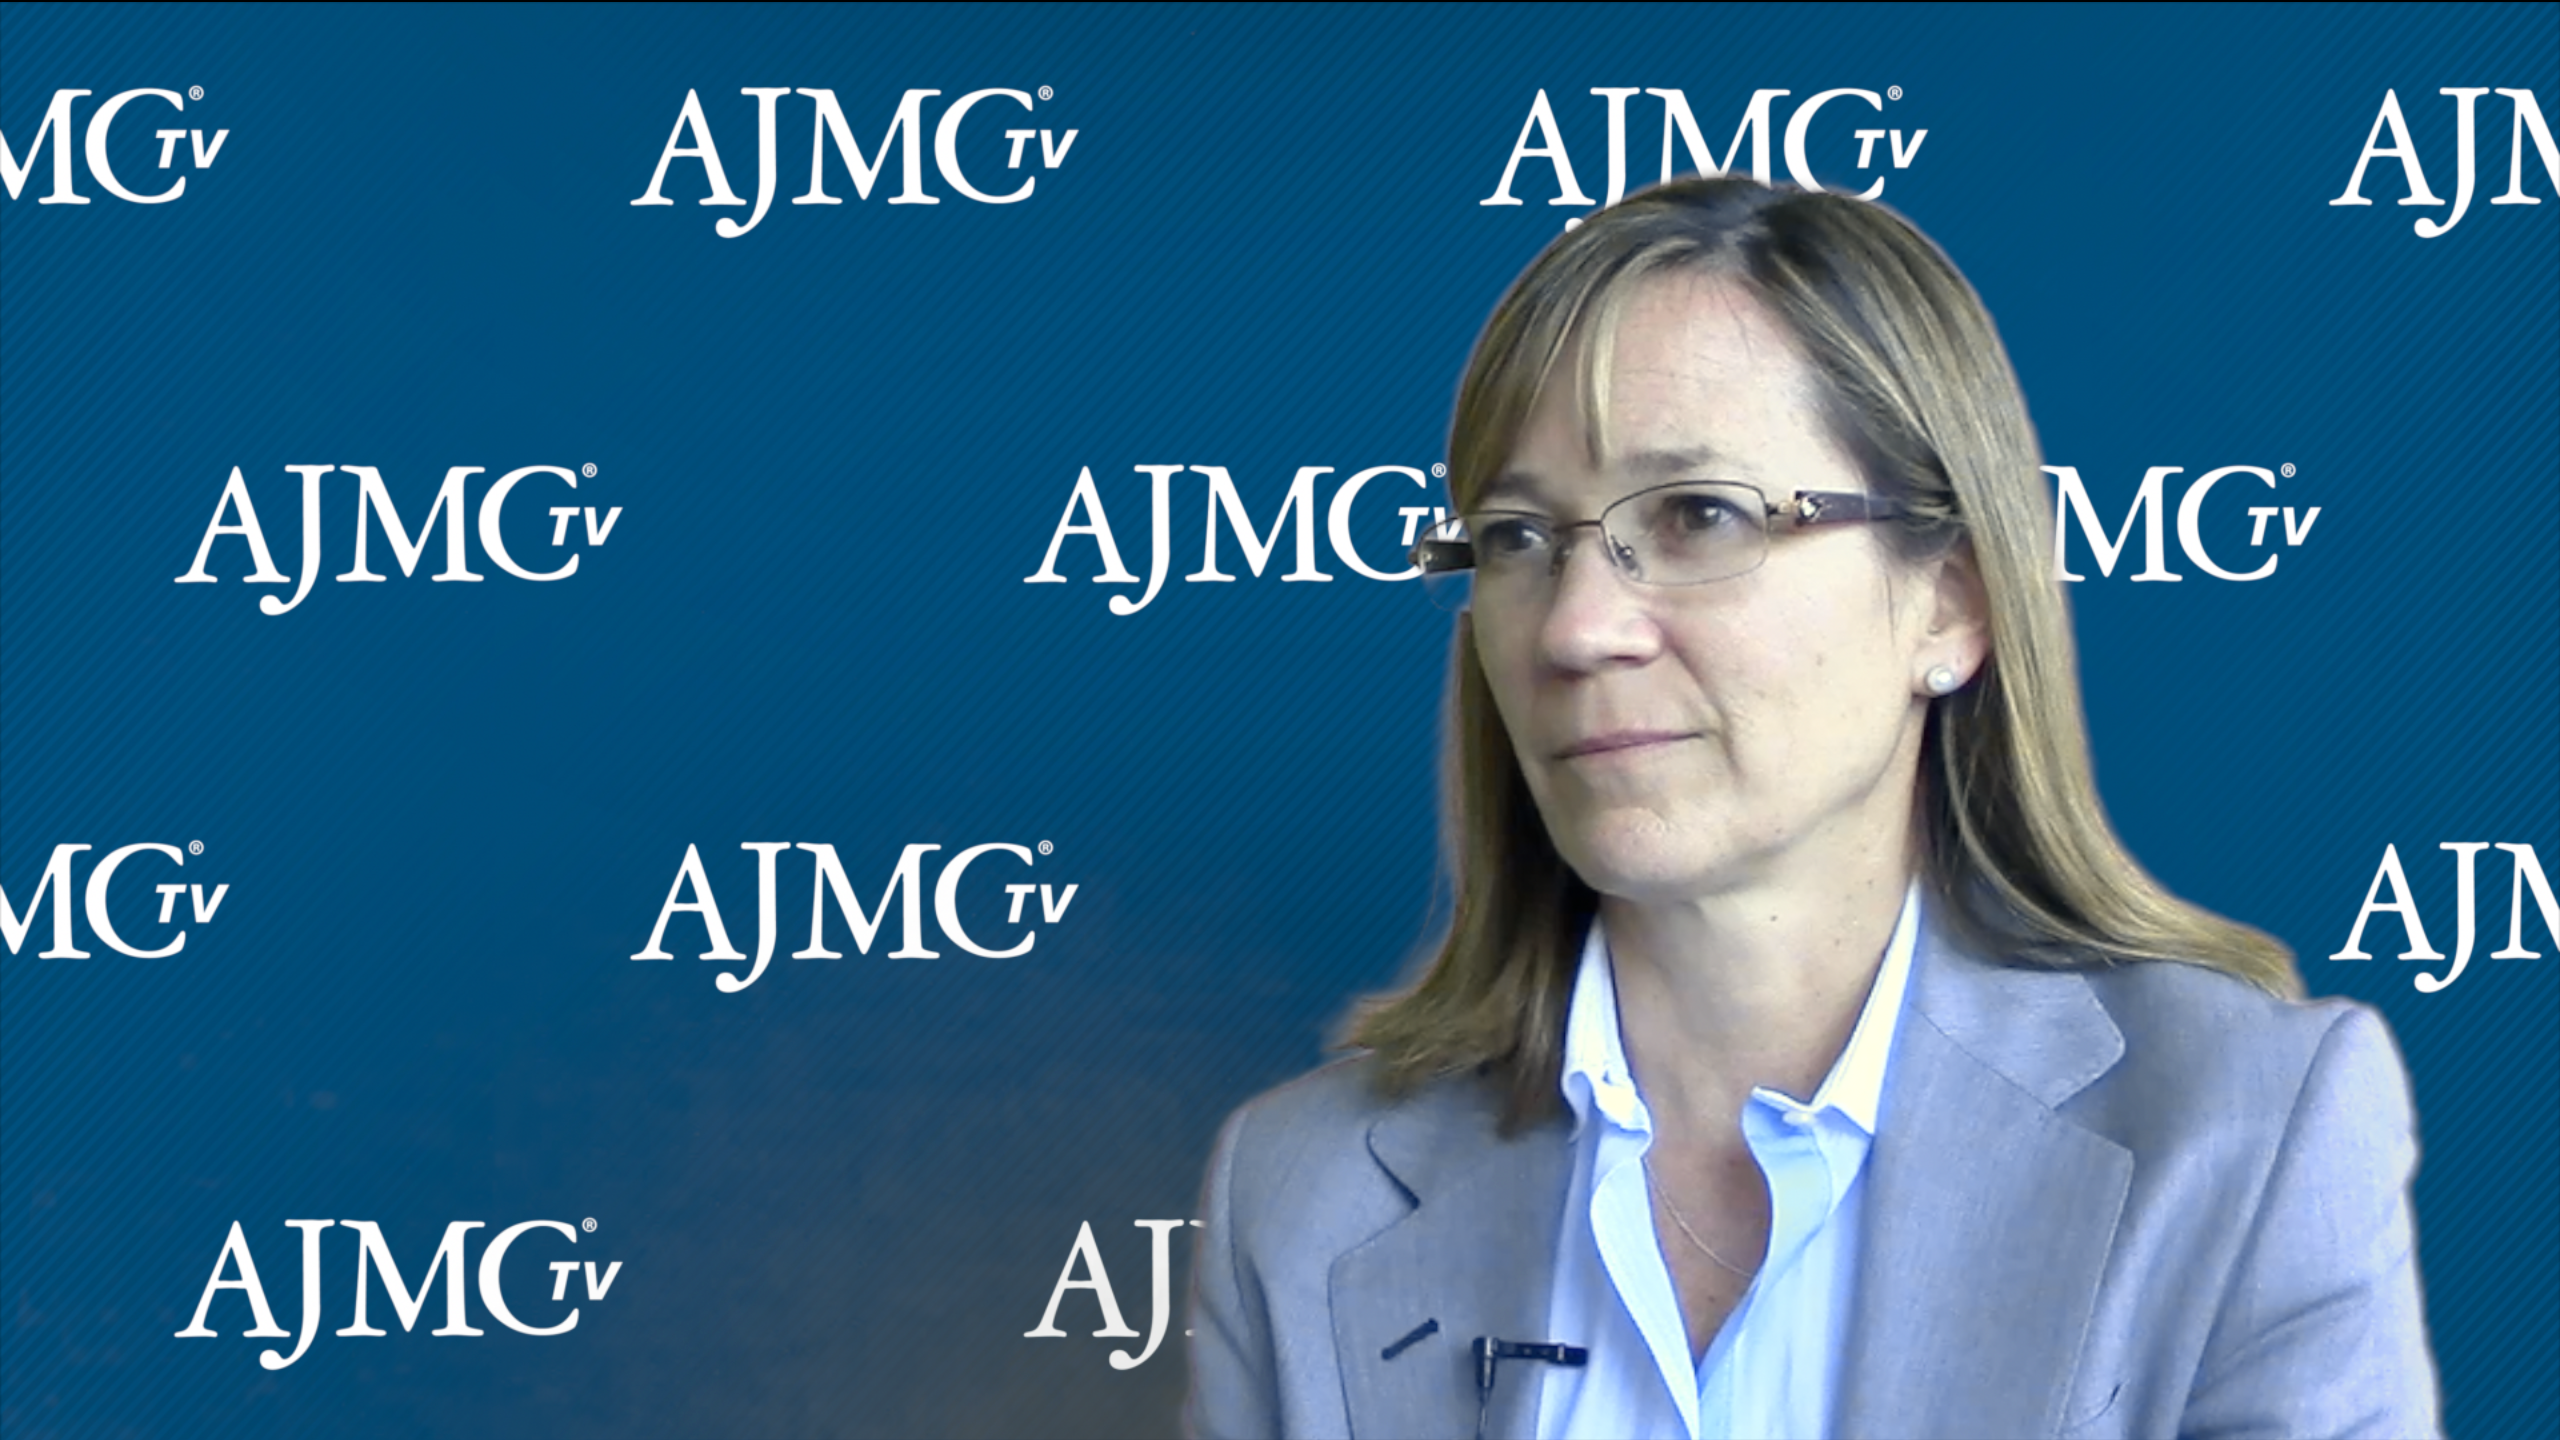 Dr Holly Kramer Discusses Components of the Advancing American Kidney Health Initiative